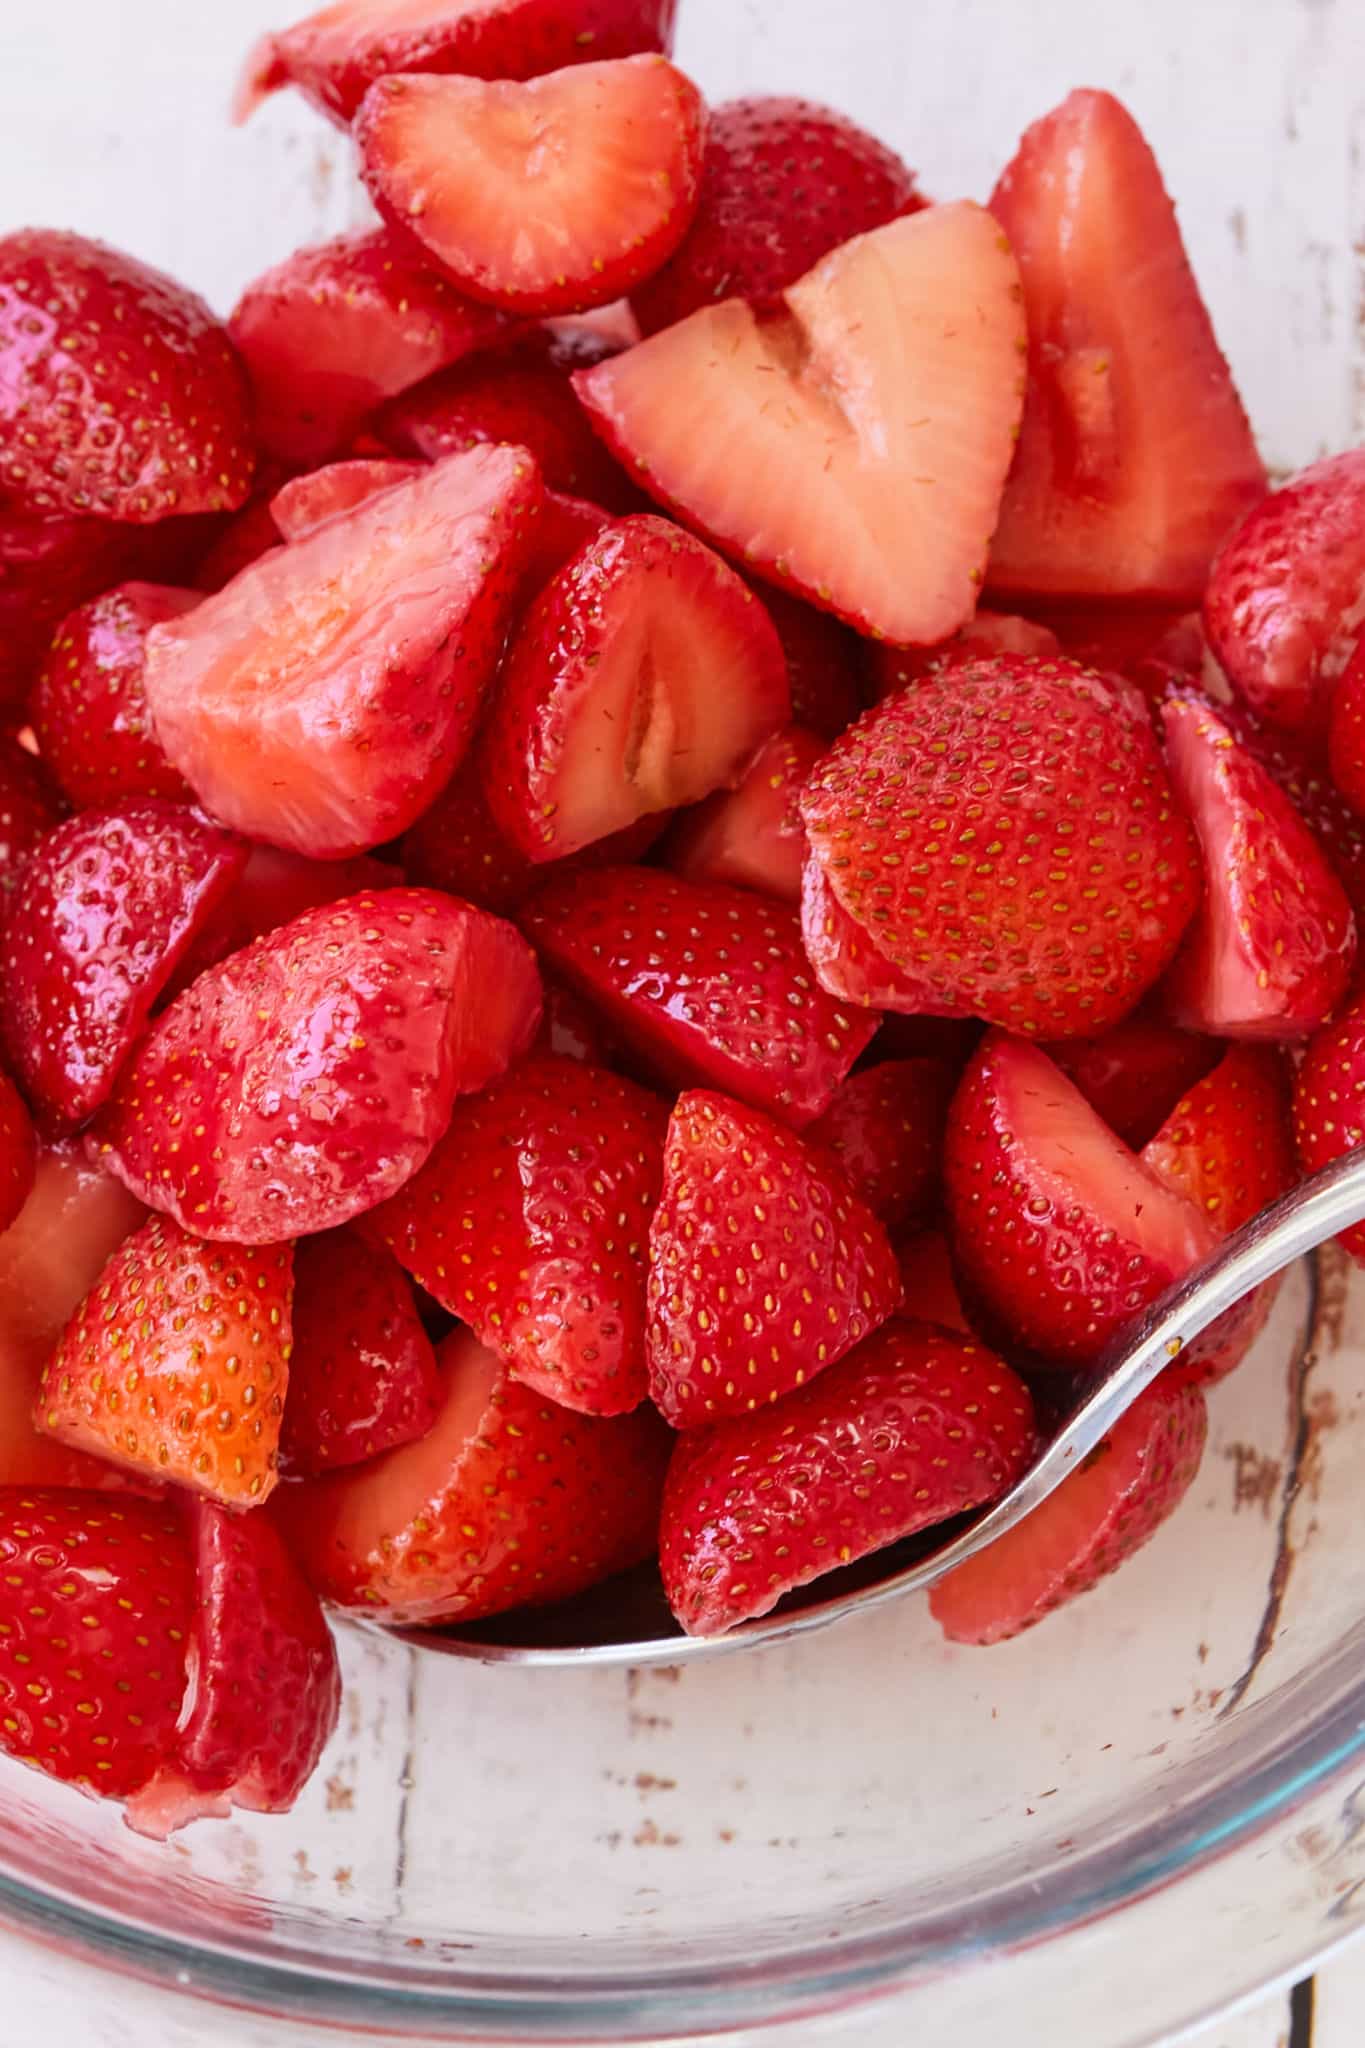 How to Grow Strawberries  Grilling and Summer How-Tos, Recipes